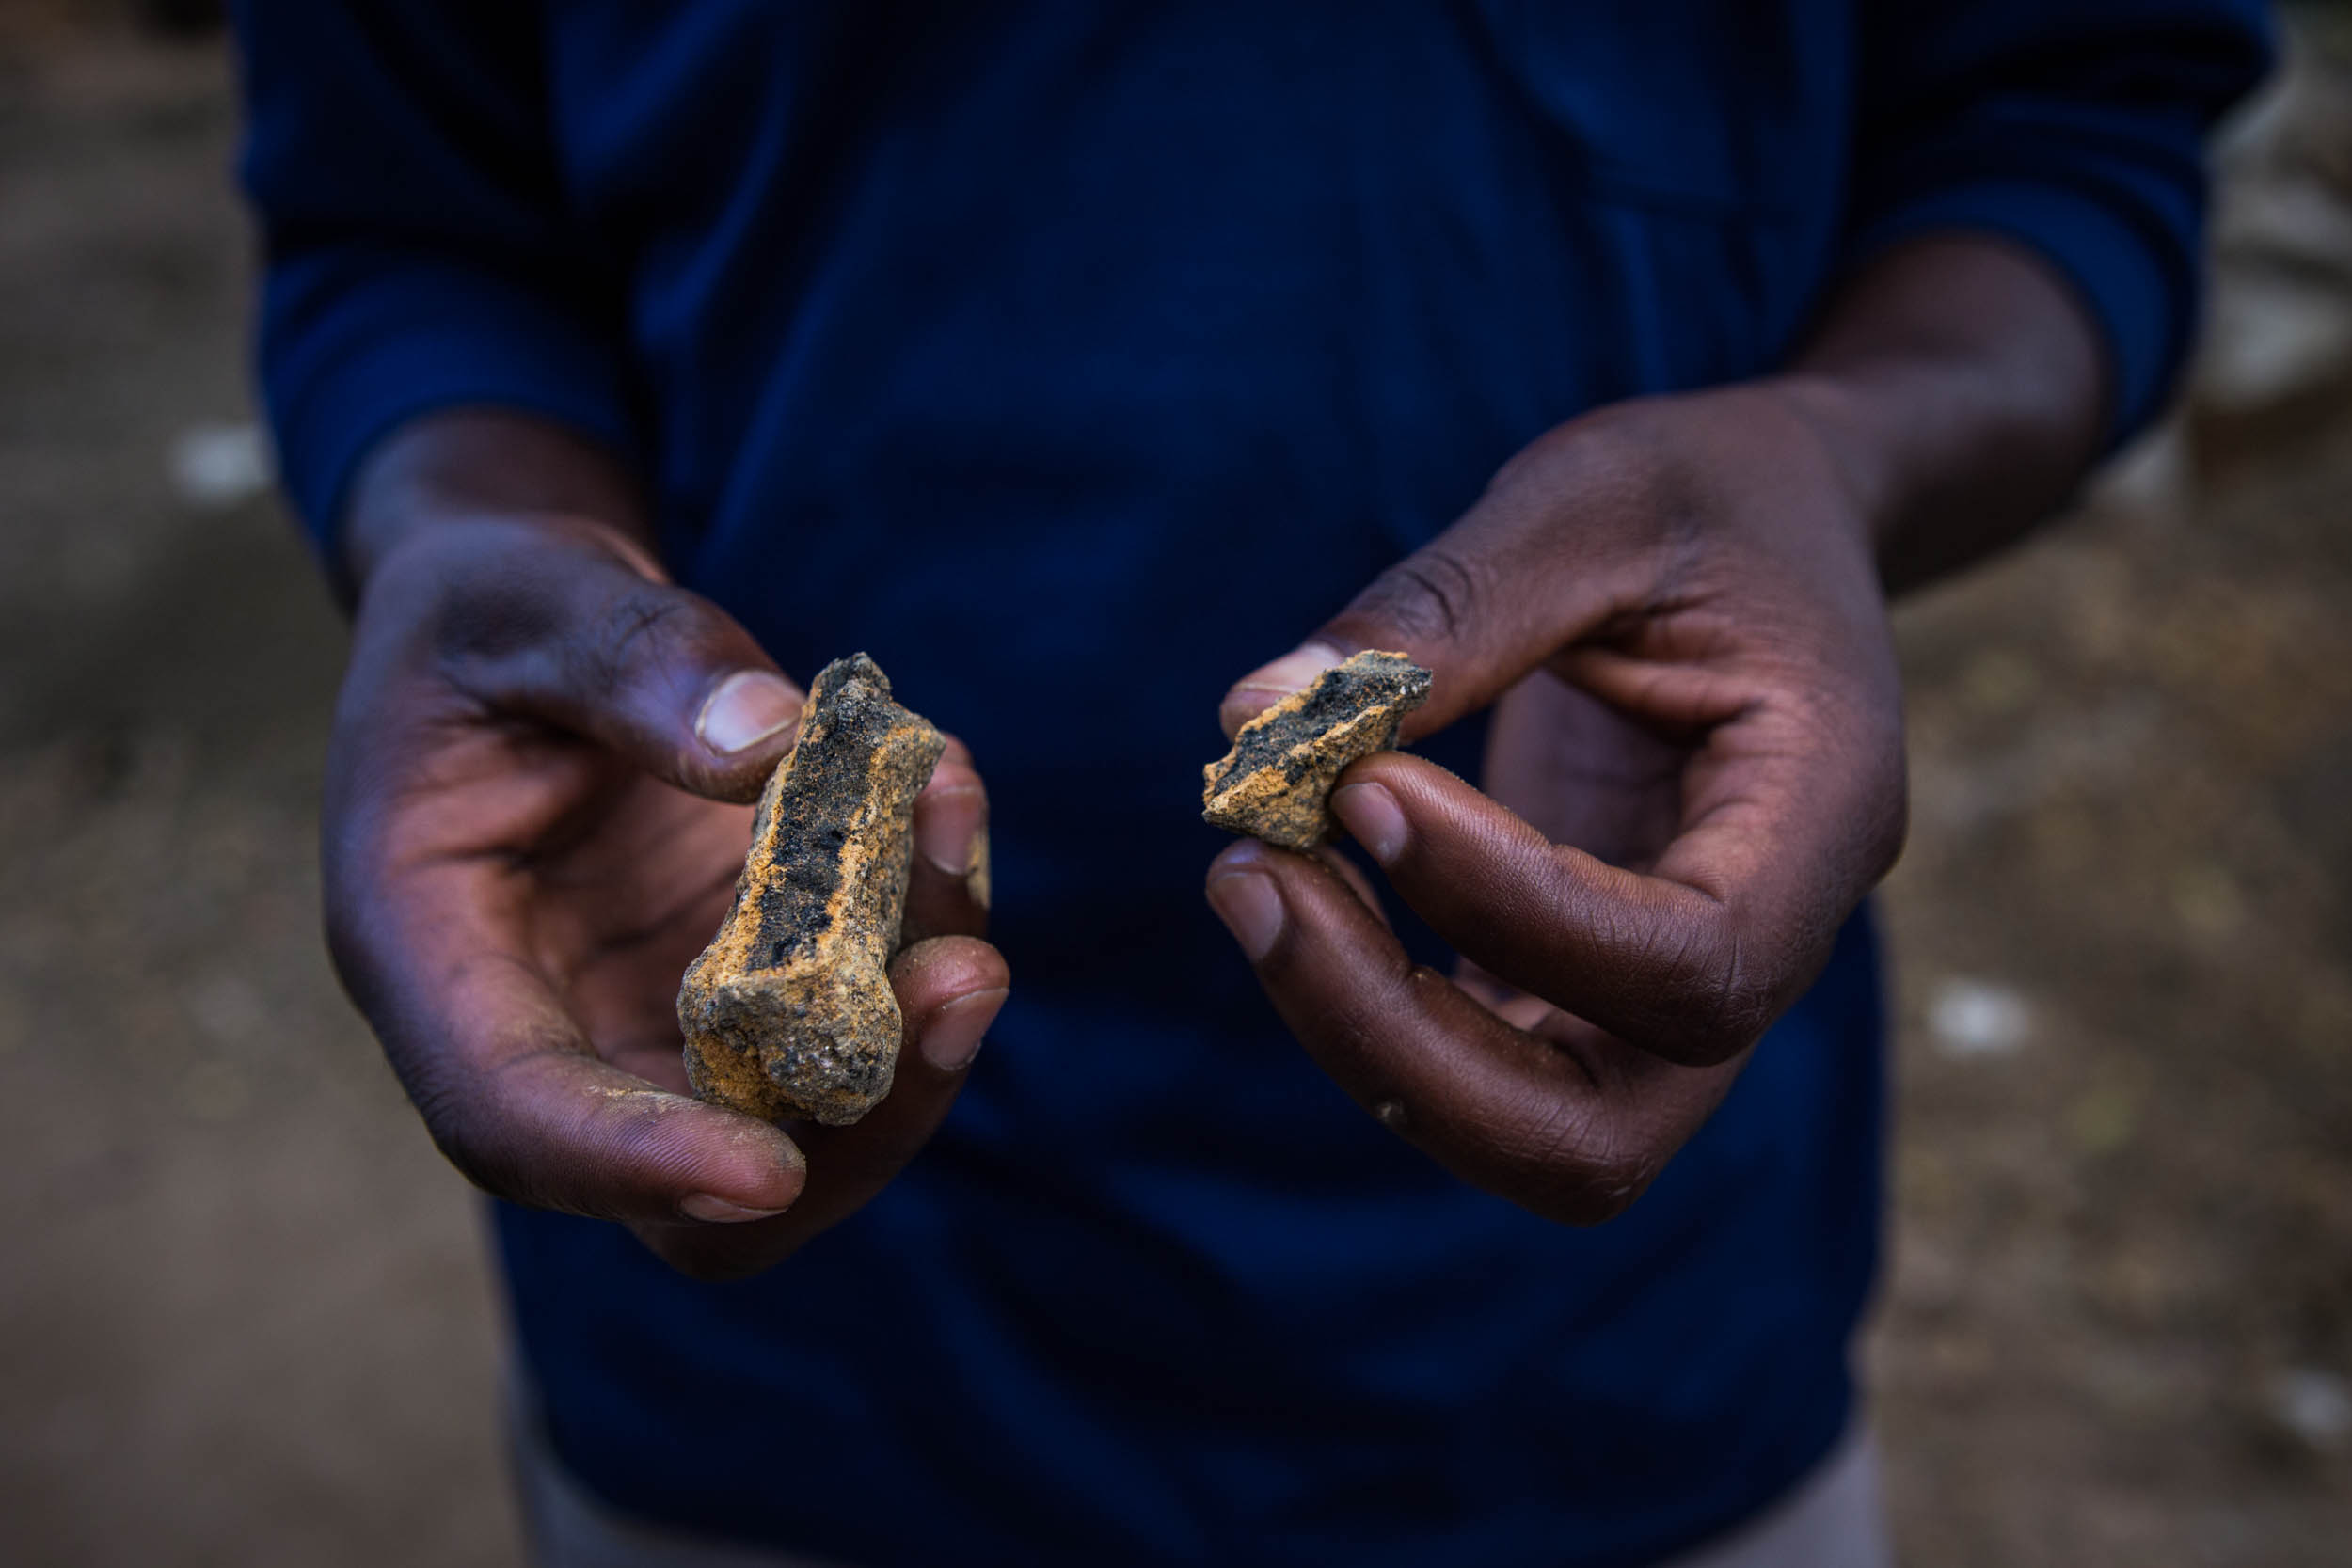  A digger is holding a Cobalt stone at Ndari artisinal mine, Haut Katanga. Men and children working in the artisanal mines are exposed to the toxics, including also high levels of uranium. 